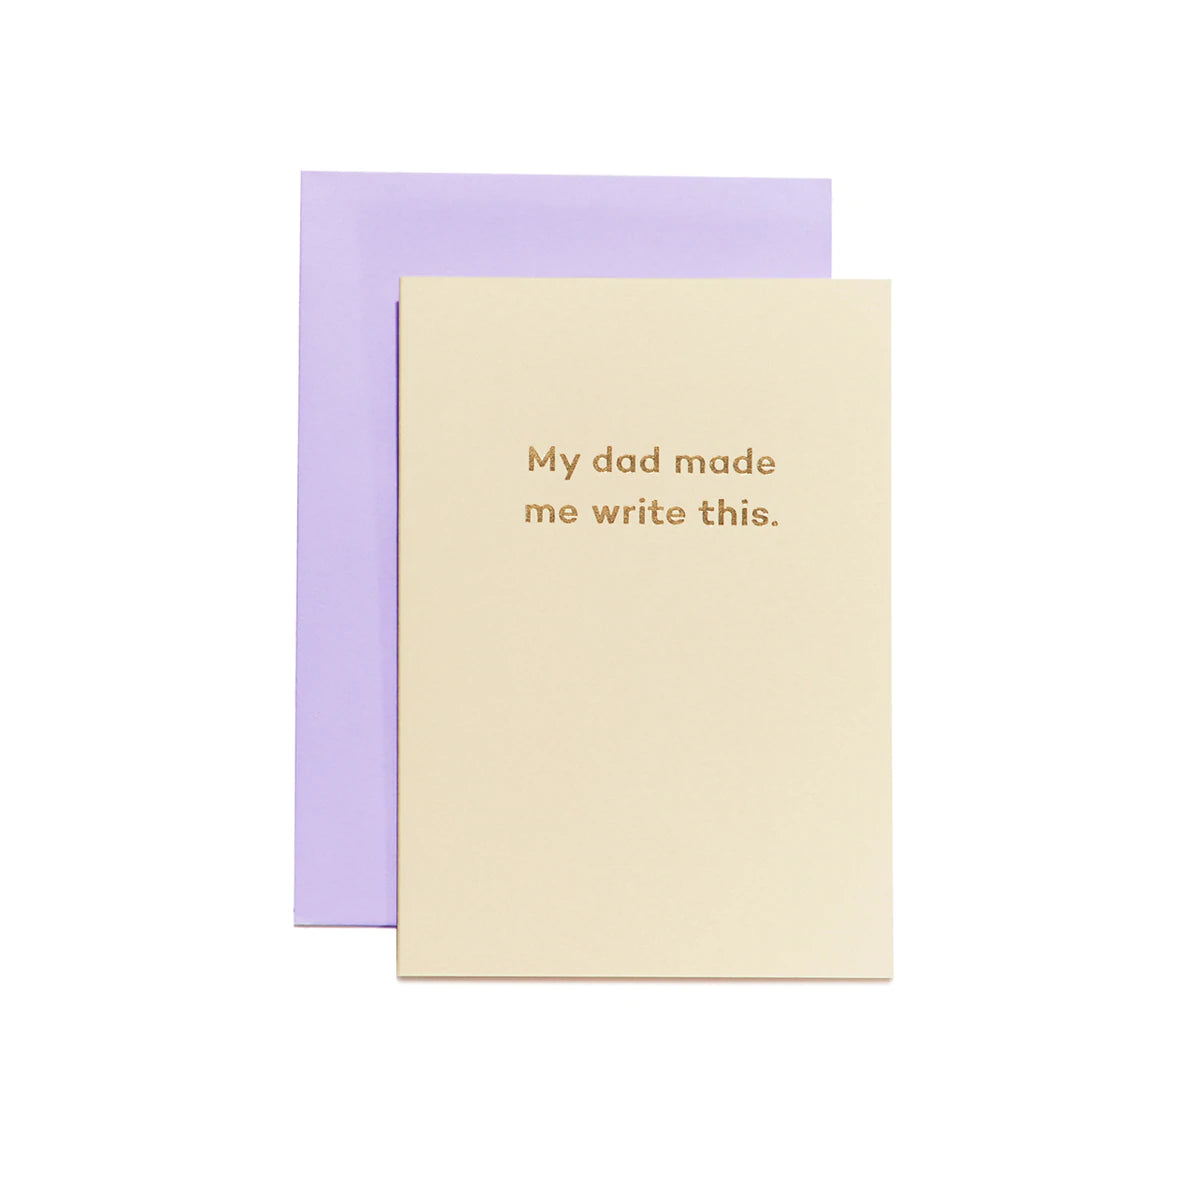 MY DAD MADE ME WRITE THIS | CARD BY MEAN MAIL